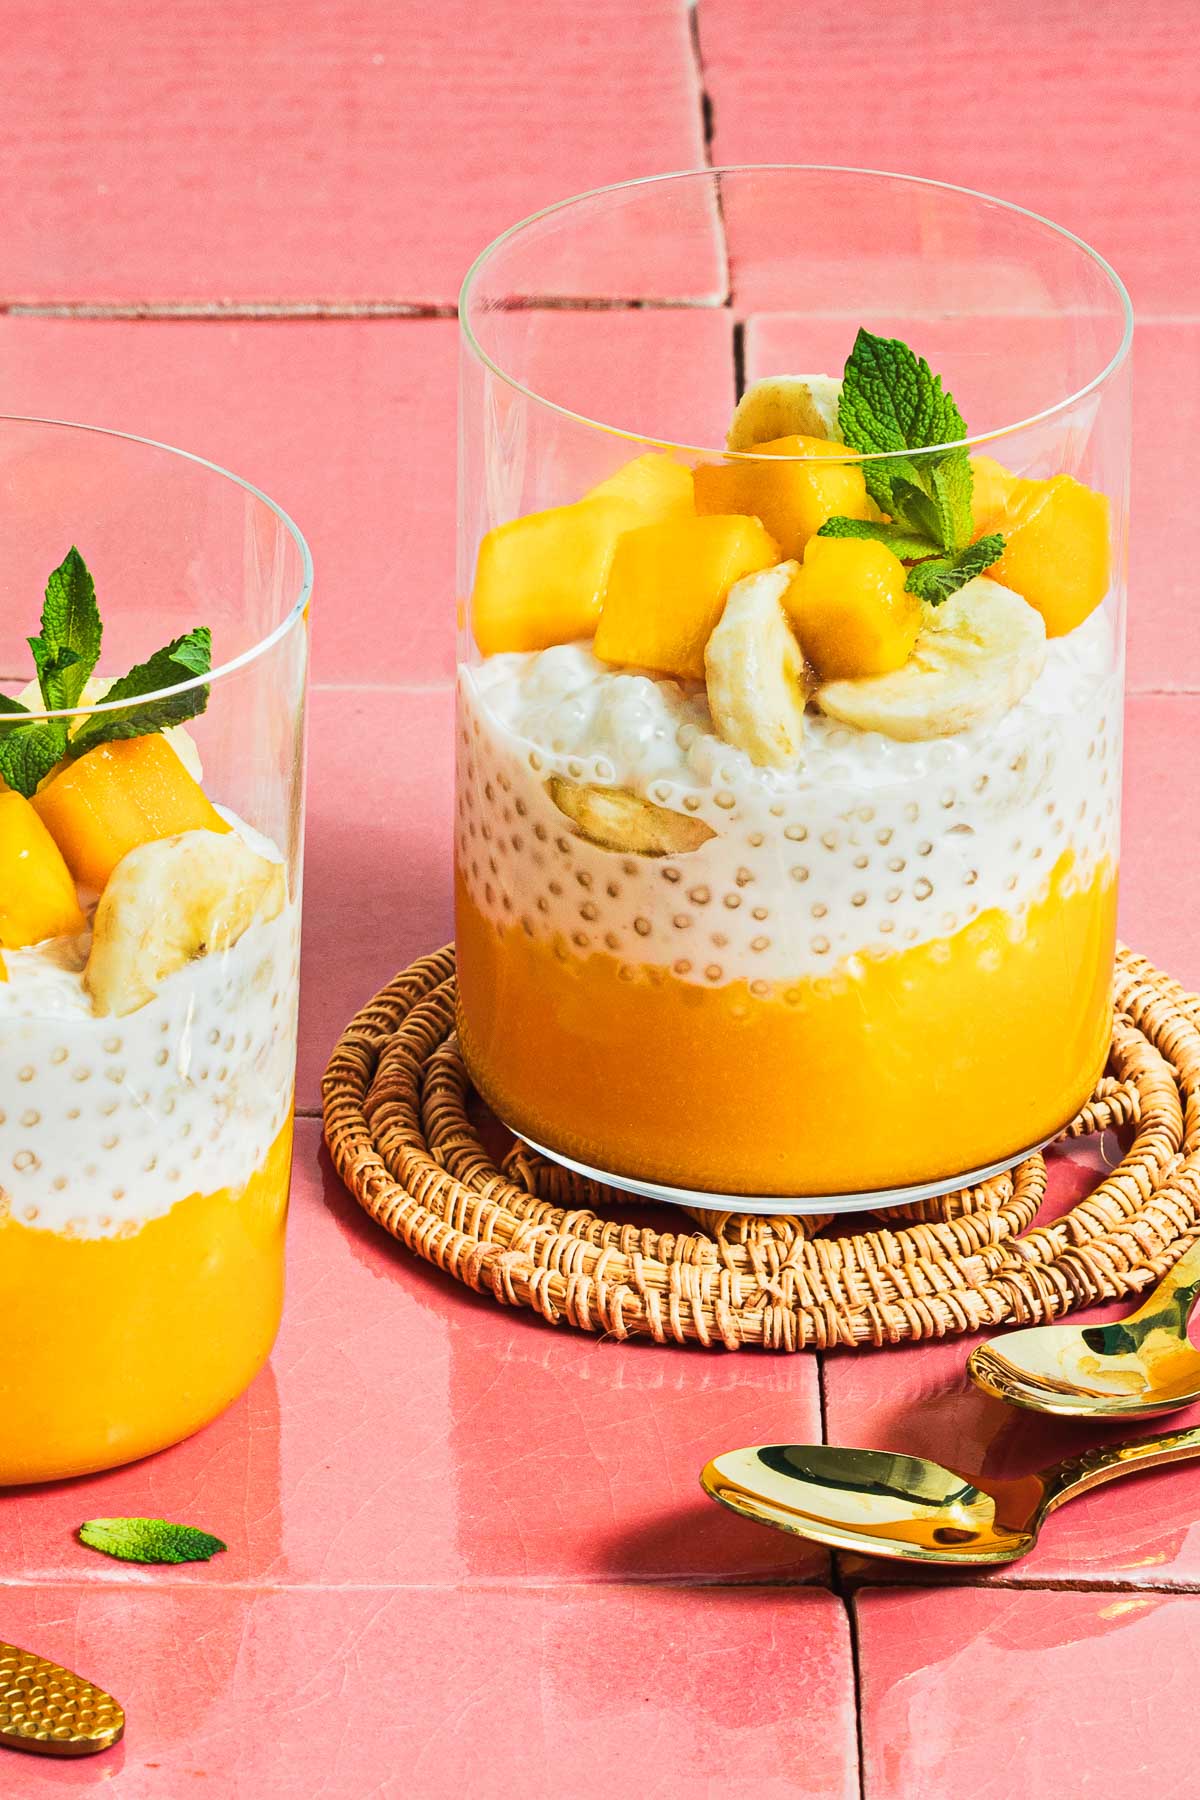 Image shows 2 glasswares filled with mango puree, sago pudding, and chopped mango and mint leaves served as a dessert.